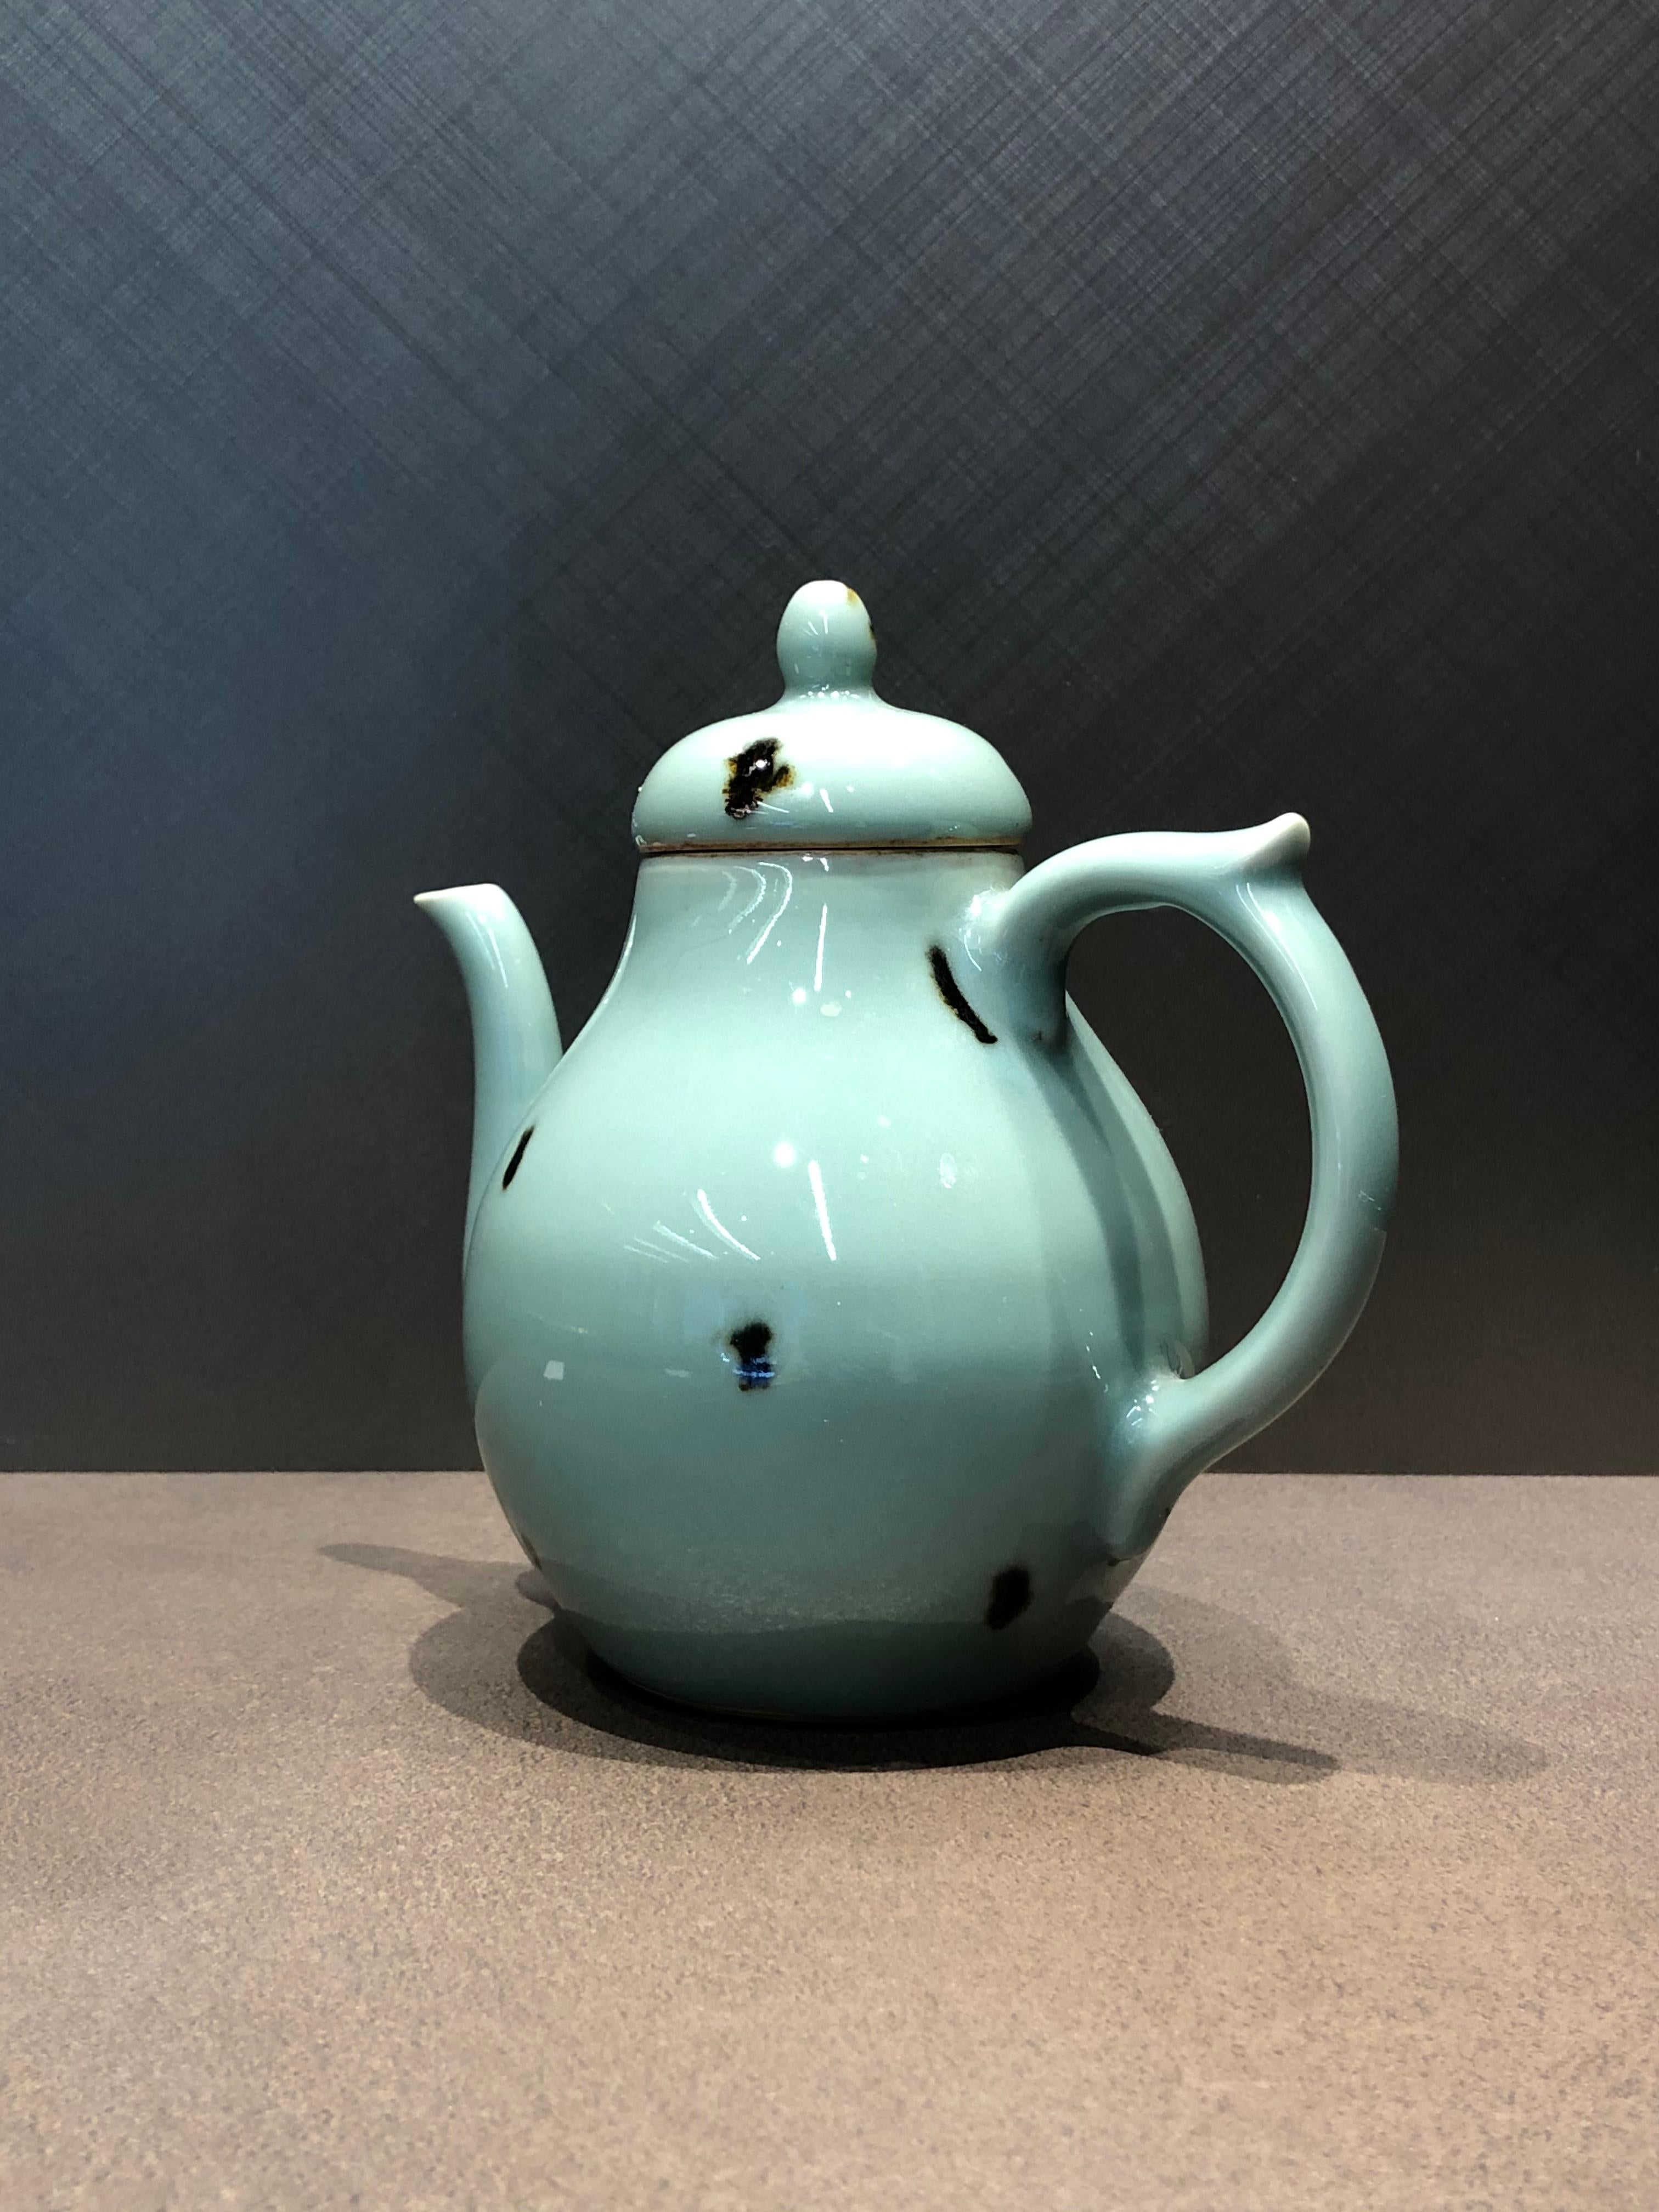 This piece made in Taisho period is imitation of Longquan ware celadon from the Yuan dynasty in China.

The technique of skipping celadon is used.
Skipping celadon is a type of celadon with iron-glazed yohen scattered over it.
It is an excellent